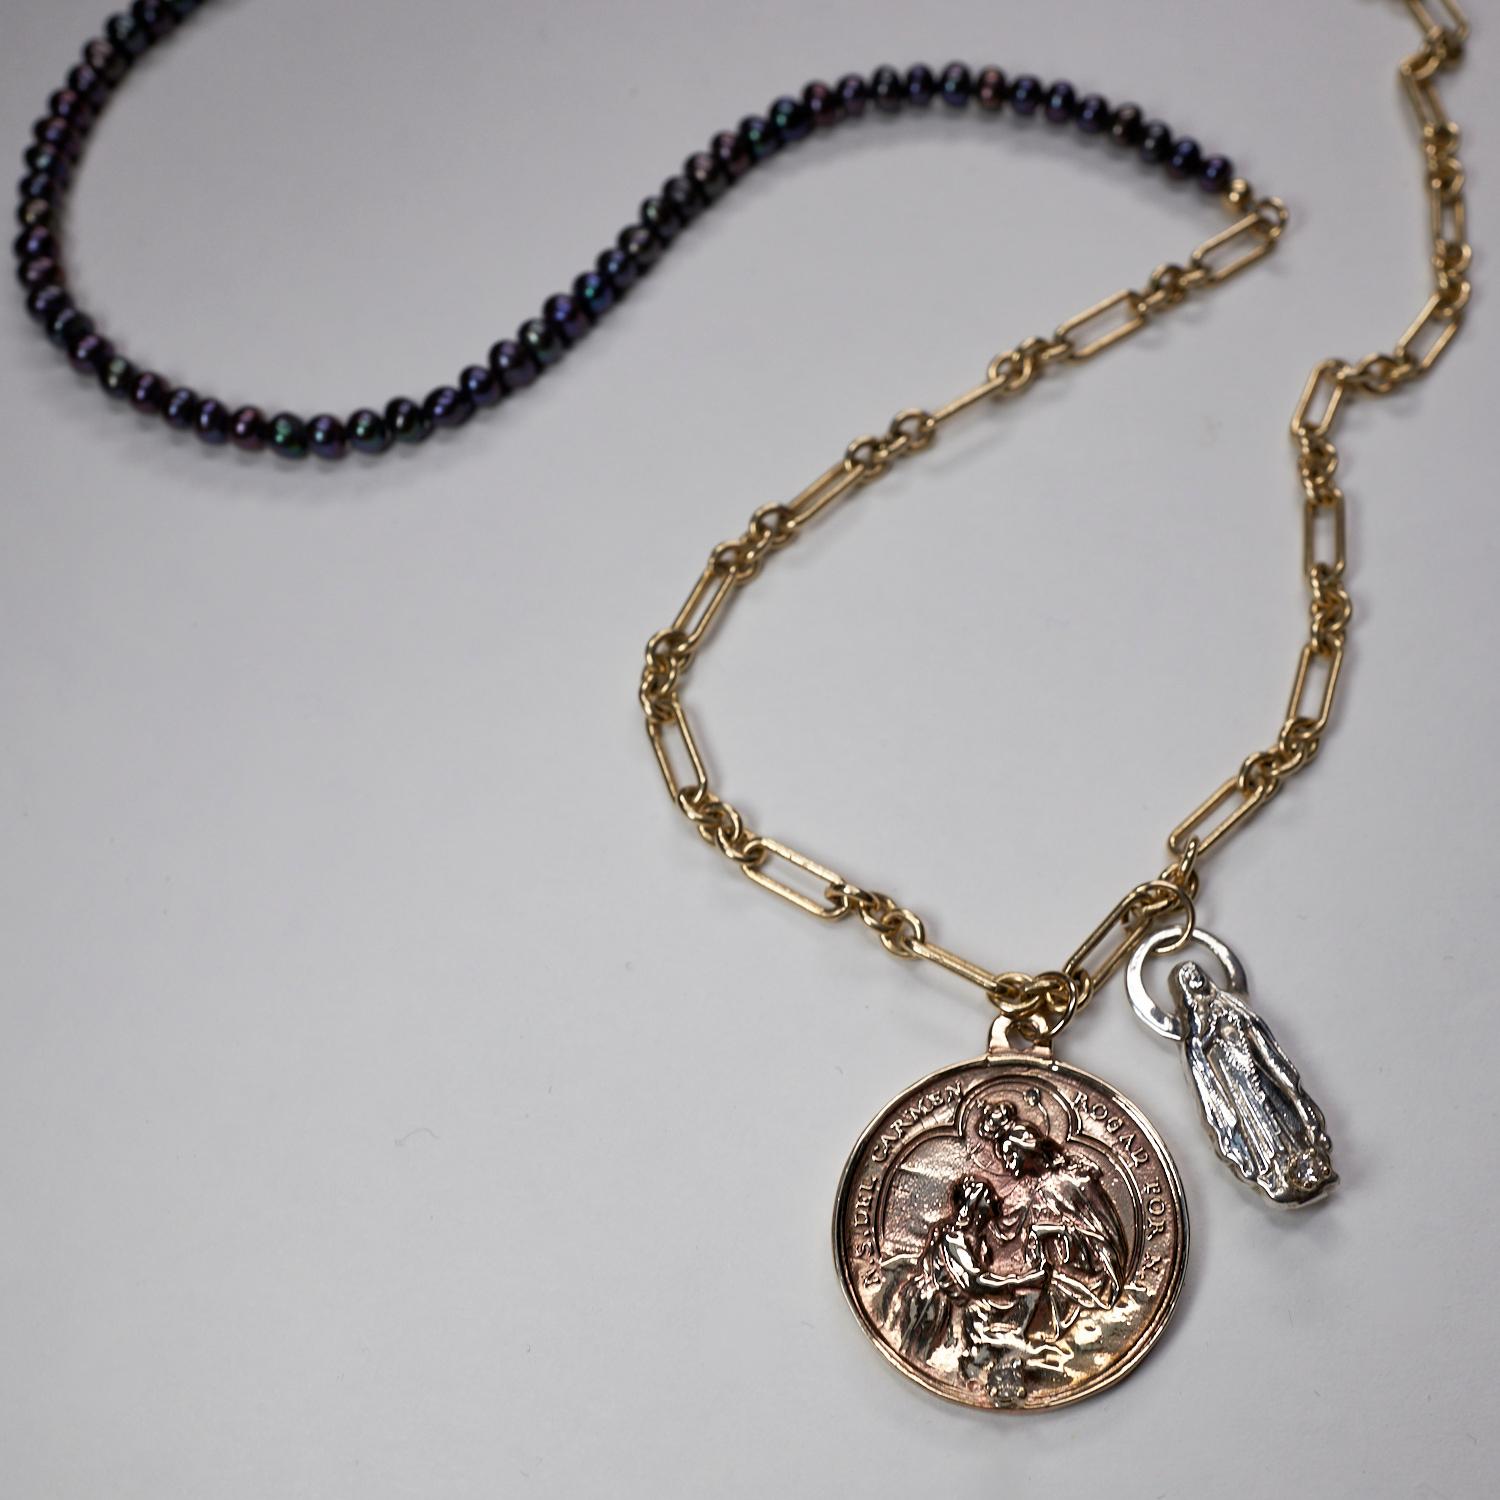 Two Raw White Diamond Set in Gold Prongs on Bronze Medal Coin Pendant and a Sterling Silver Virgin Mary Figurine Hanging on a Black Pearl and Chunky Chain Gold Filled Necklace Medal, One of a kind 24